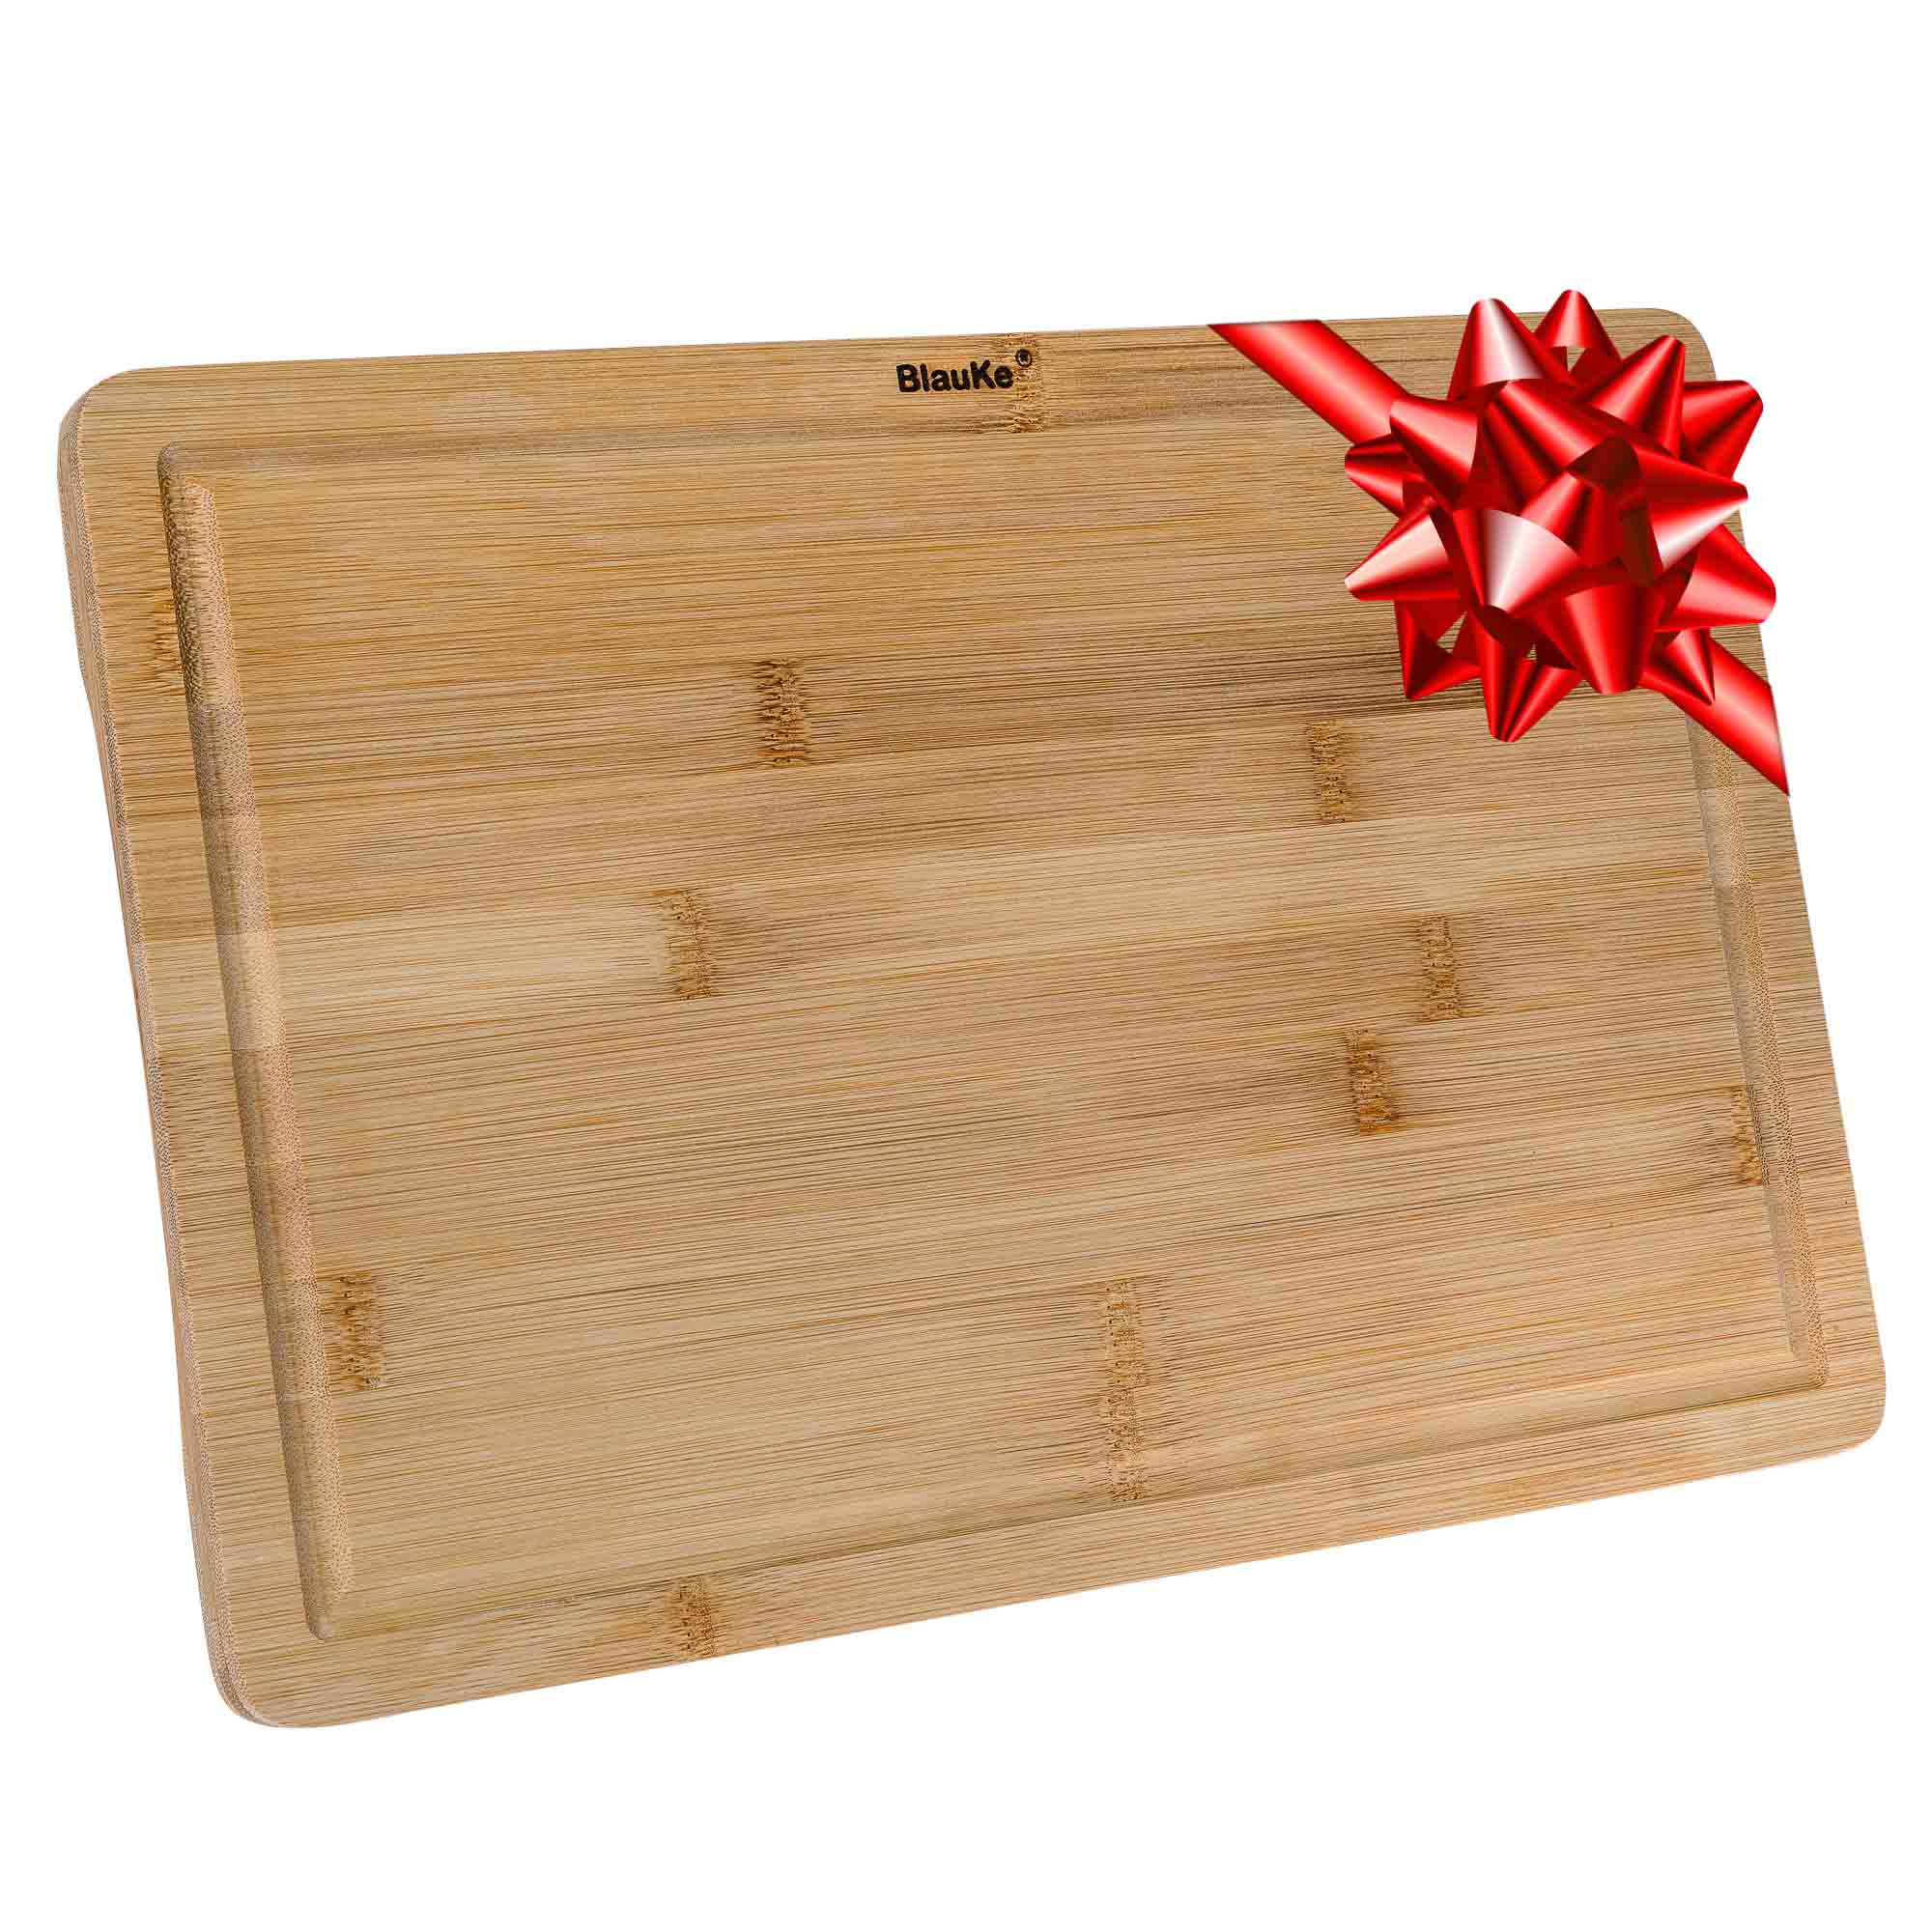 Wood Cutting Board for Kitchen 15x10 inch - Wooden Serving Tray - Large Bamboo Chopping Board with Juice Groove and Handles